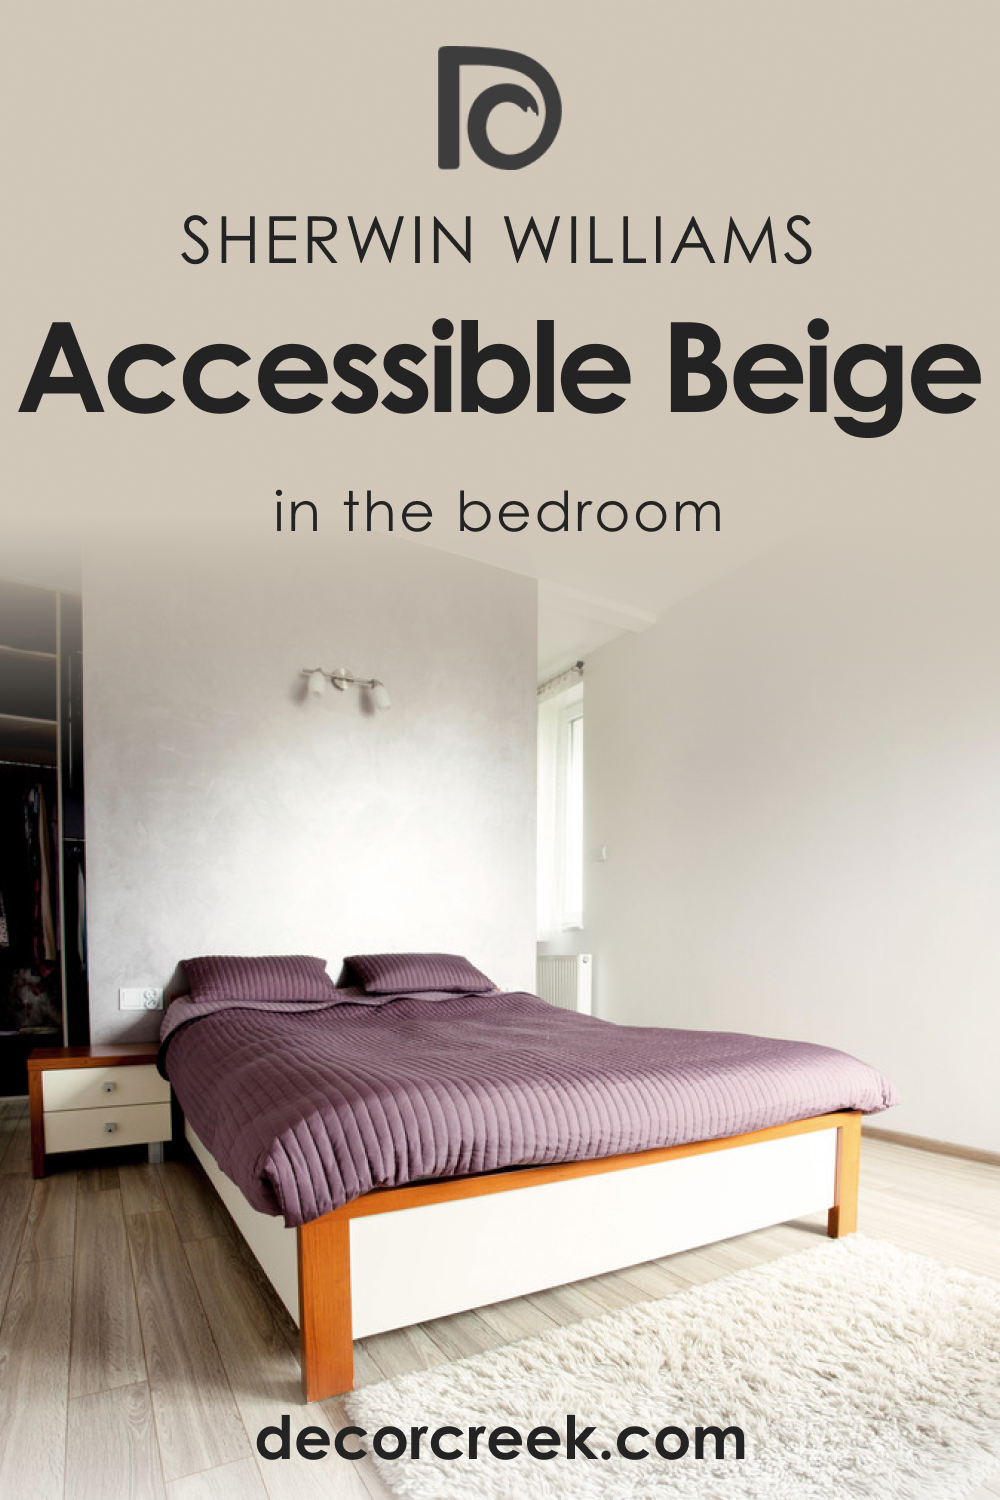 How to Use Accessible Beige SW 7036 in the Bedroom?